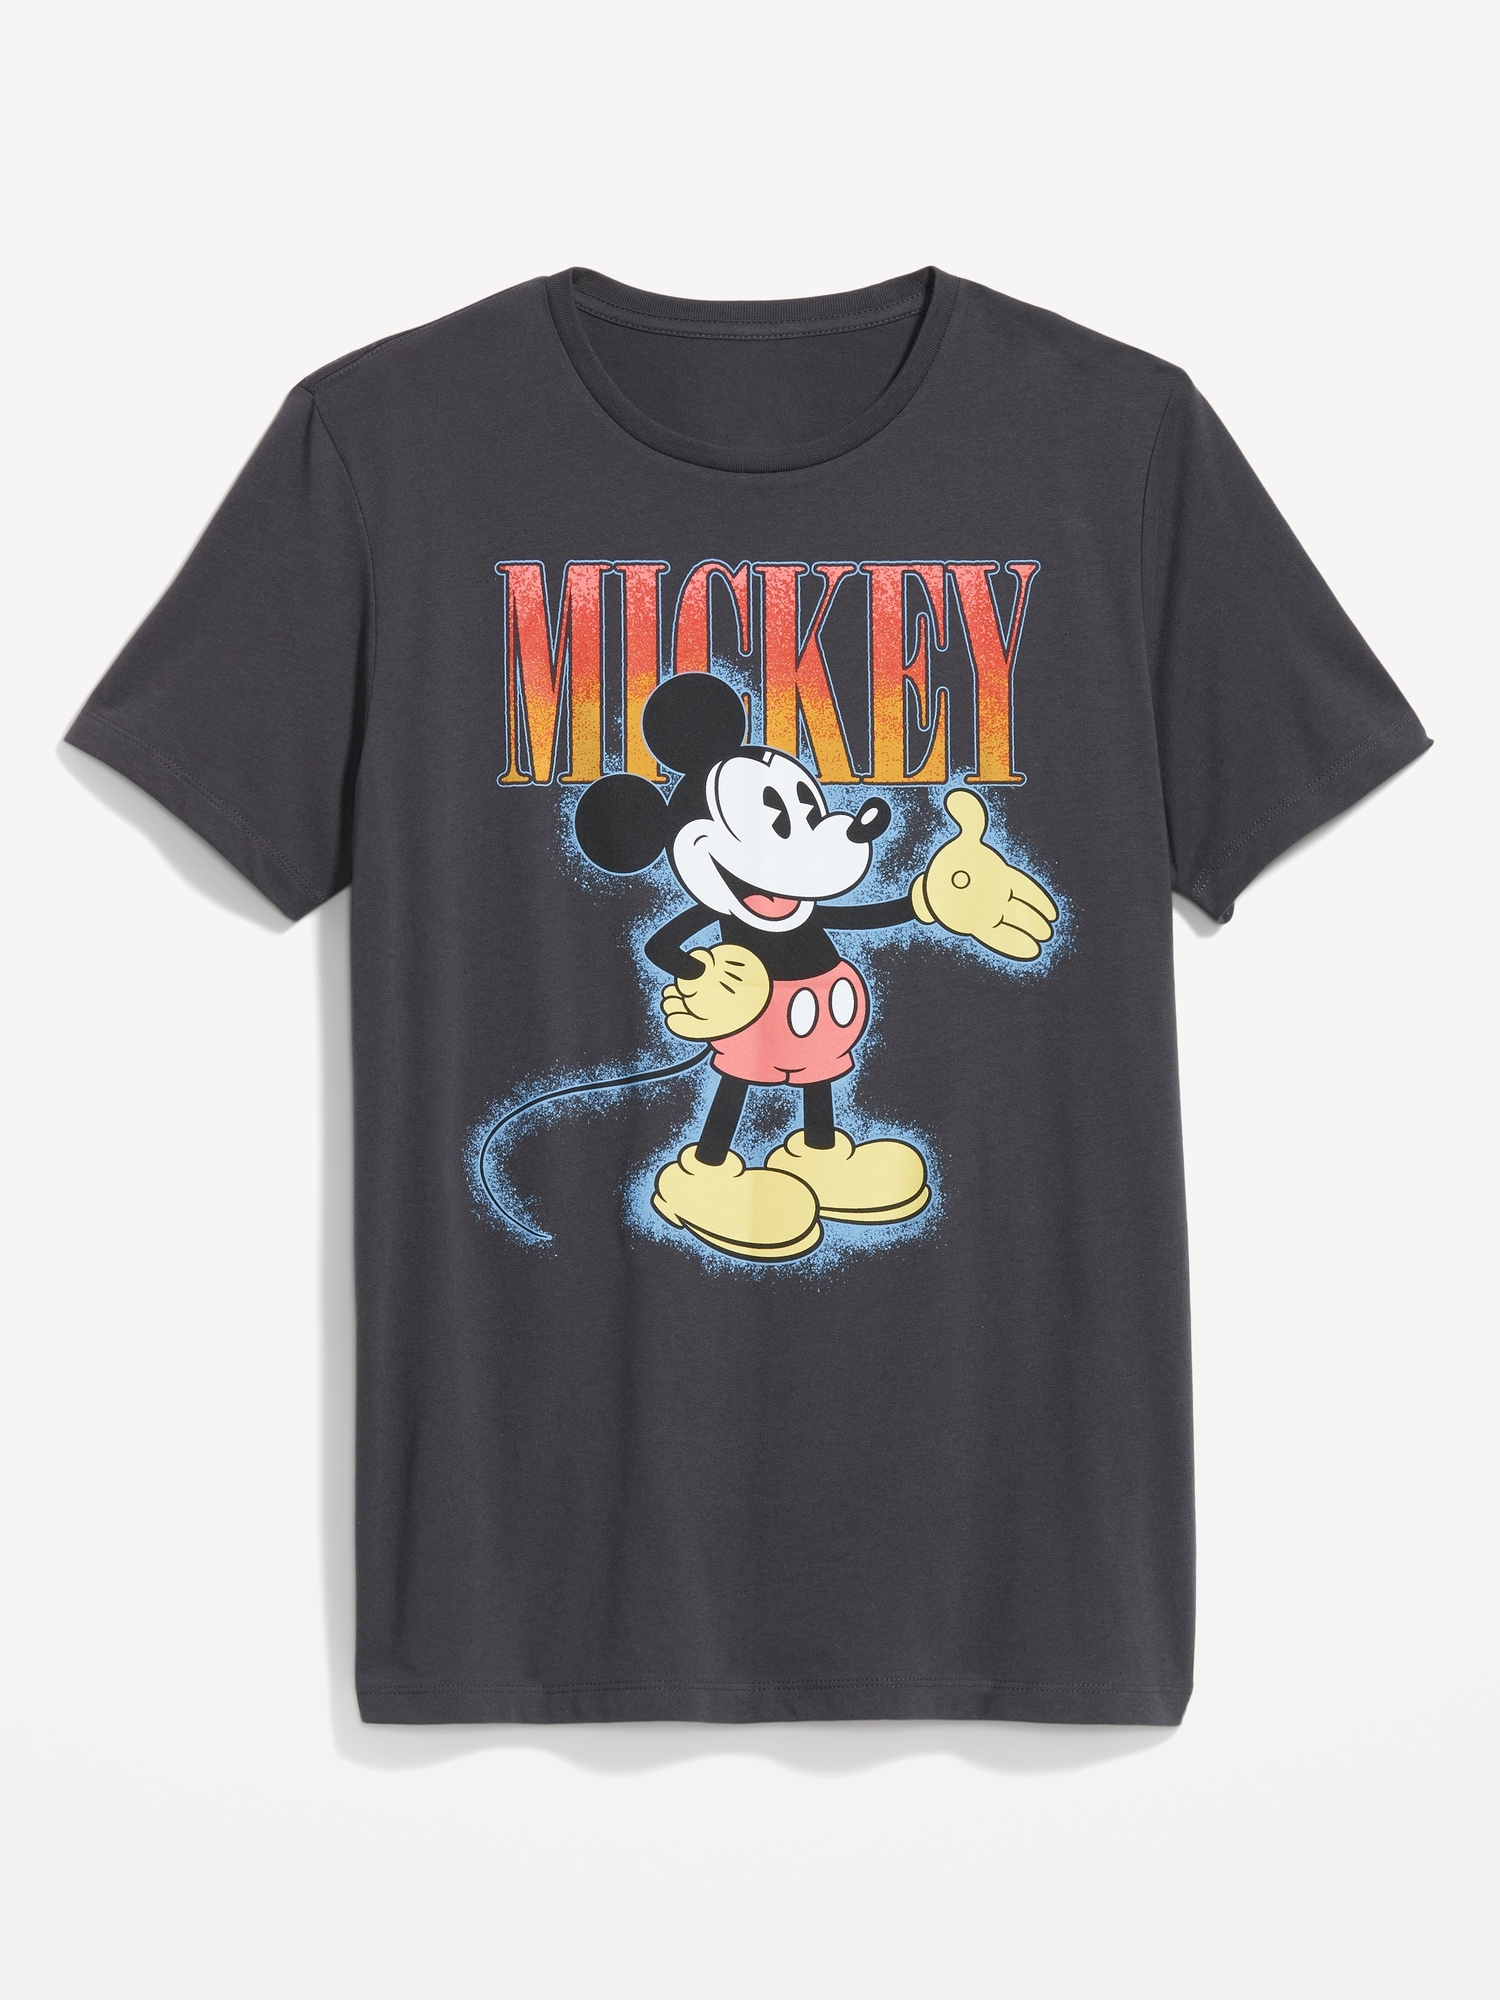 Disney© Mickey Mouse Gender-Neutral T-Shirt for Adults